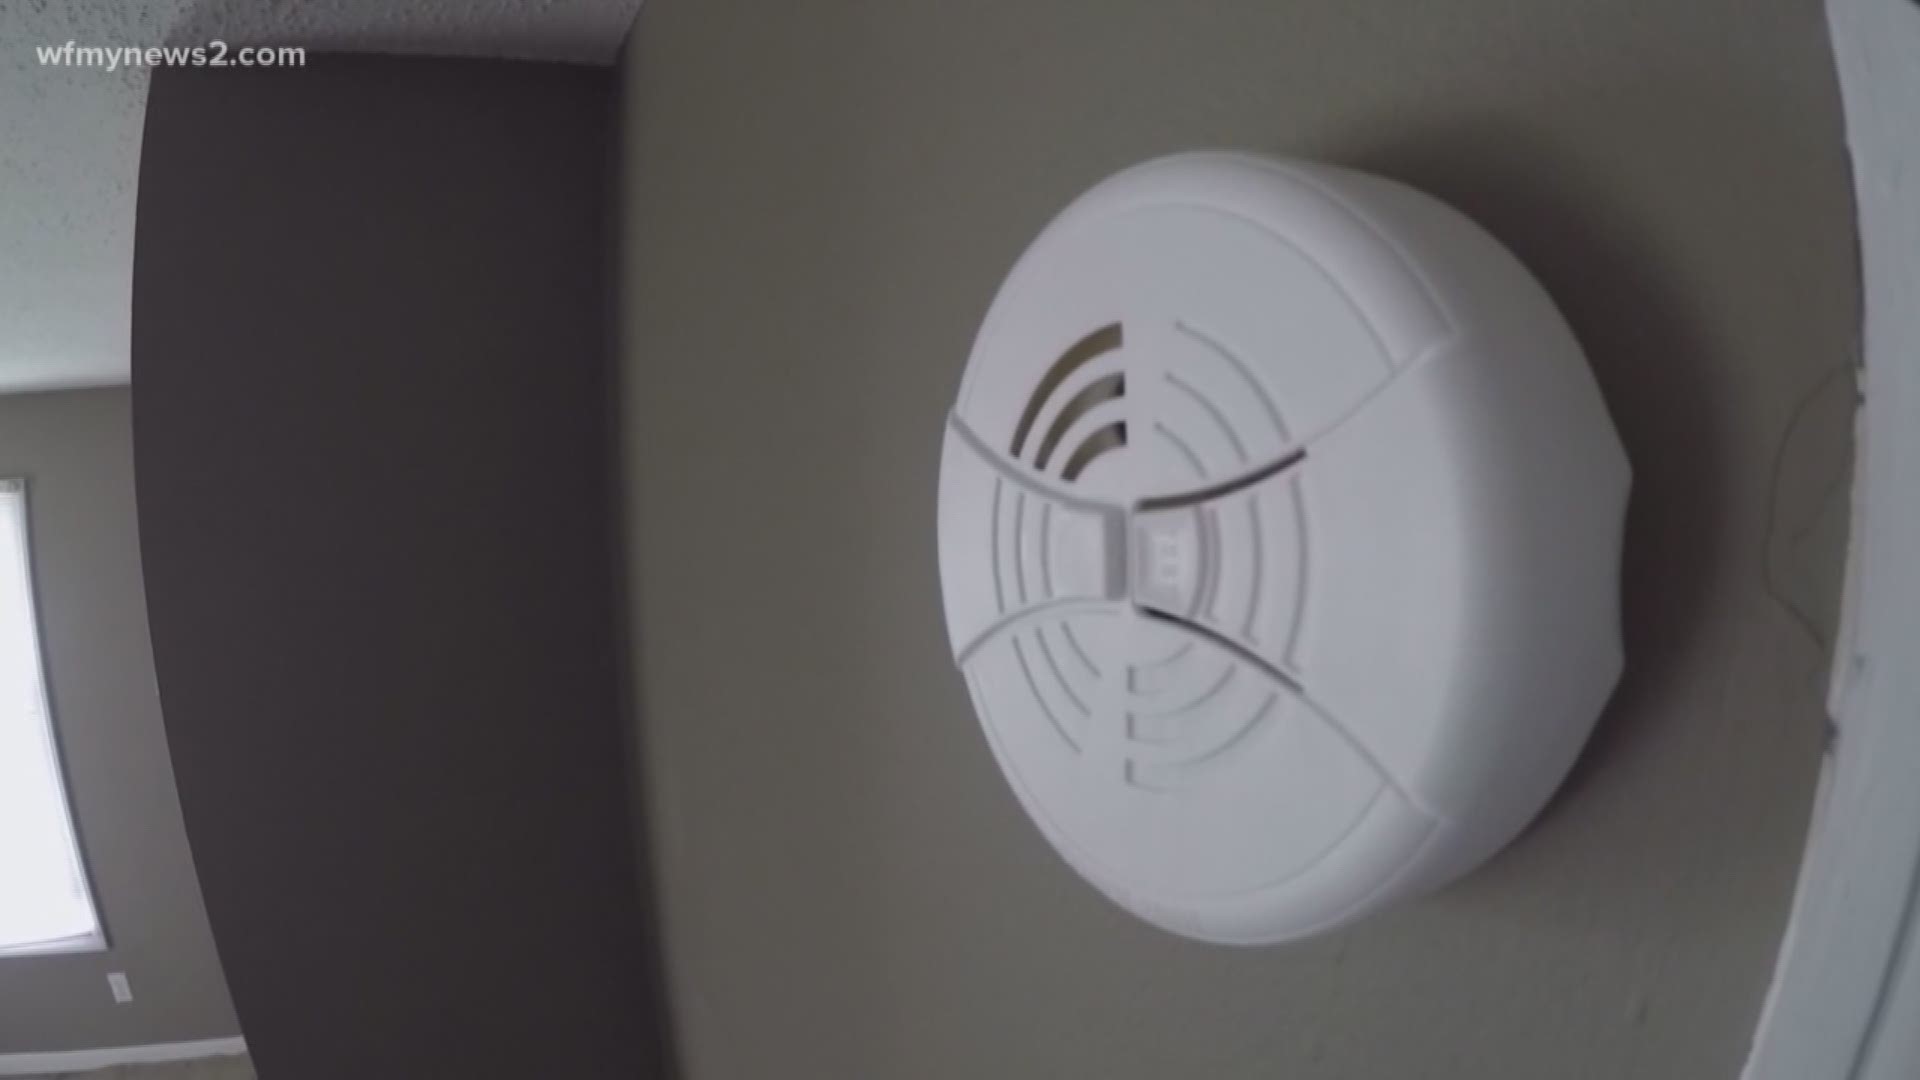 Certain fires may actually fly under your smoke detector’s radar. Know the difference to keep your family safe.